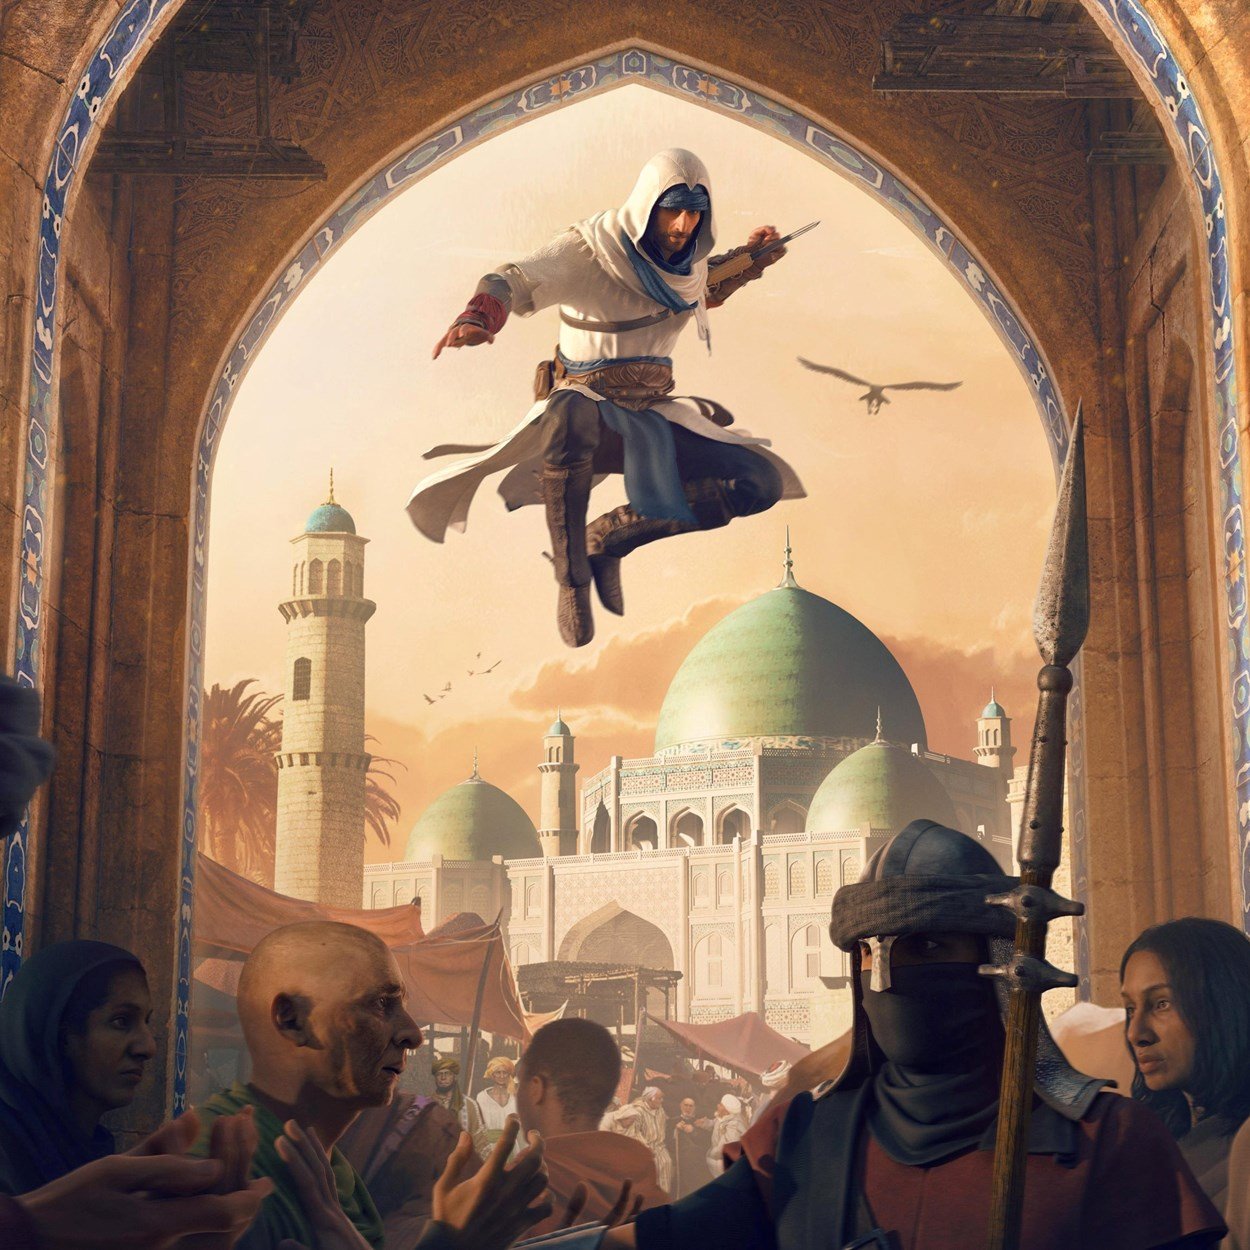 Assassin's Creed Mirage PC system requirements detailed – Minimum &  recommended specs - Dexerto